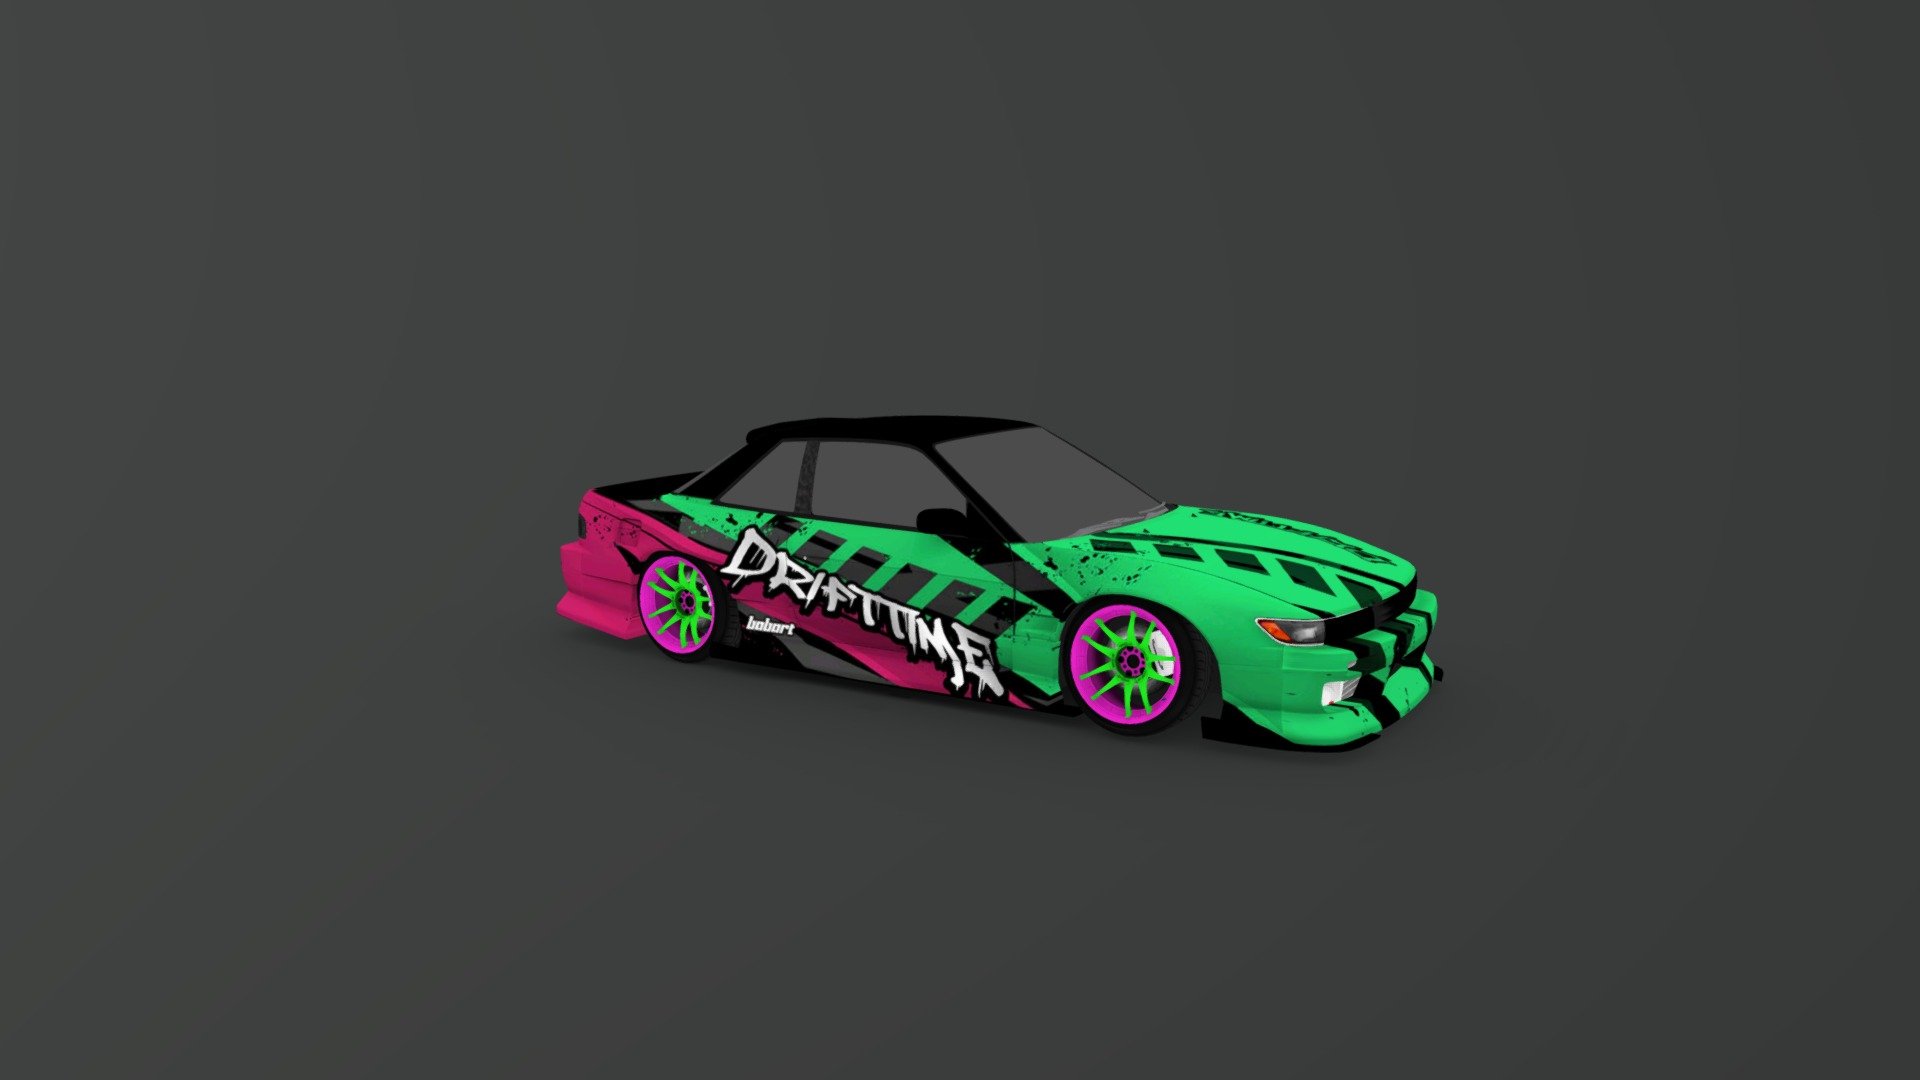 This is not just a drift car, it can also be used for touge and normal racing with the right setup. The car has between 210bhp and 260bhp depending on your boost settings, 42 degrees of steering lock, and 3 types of tires: Part Worn, Street and Semi Slicks 3d model